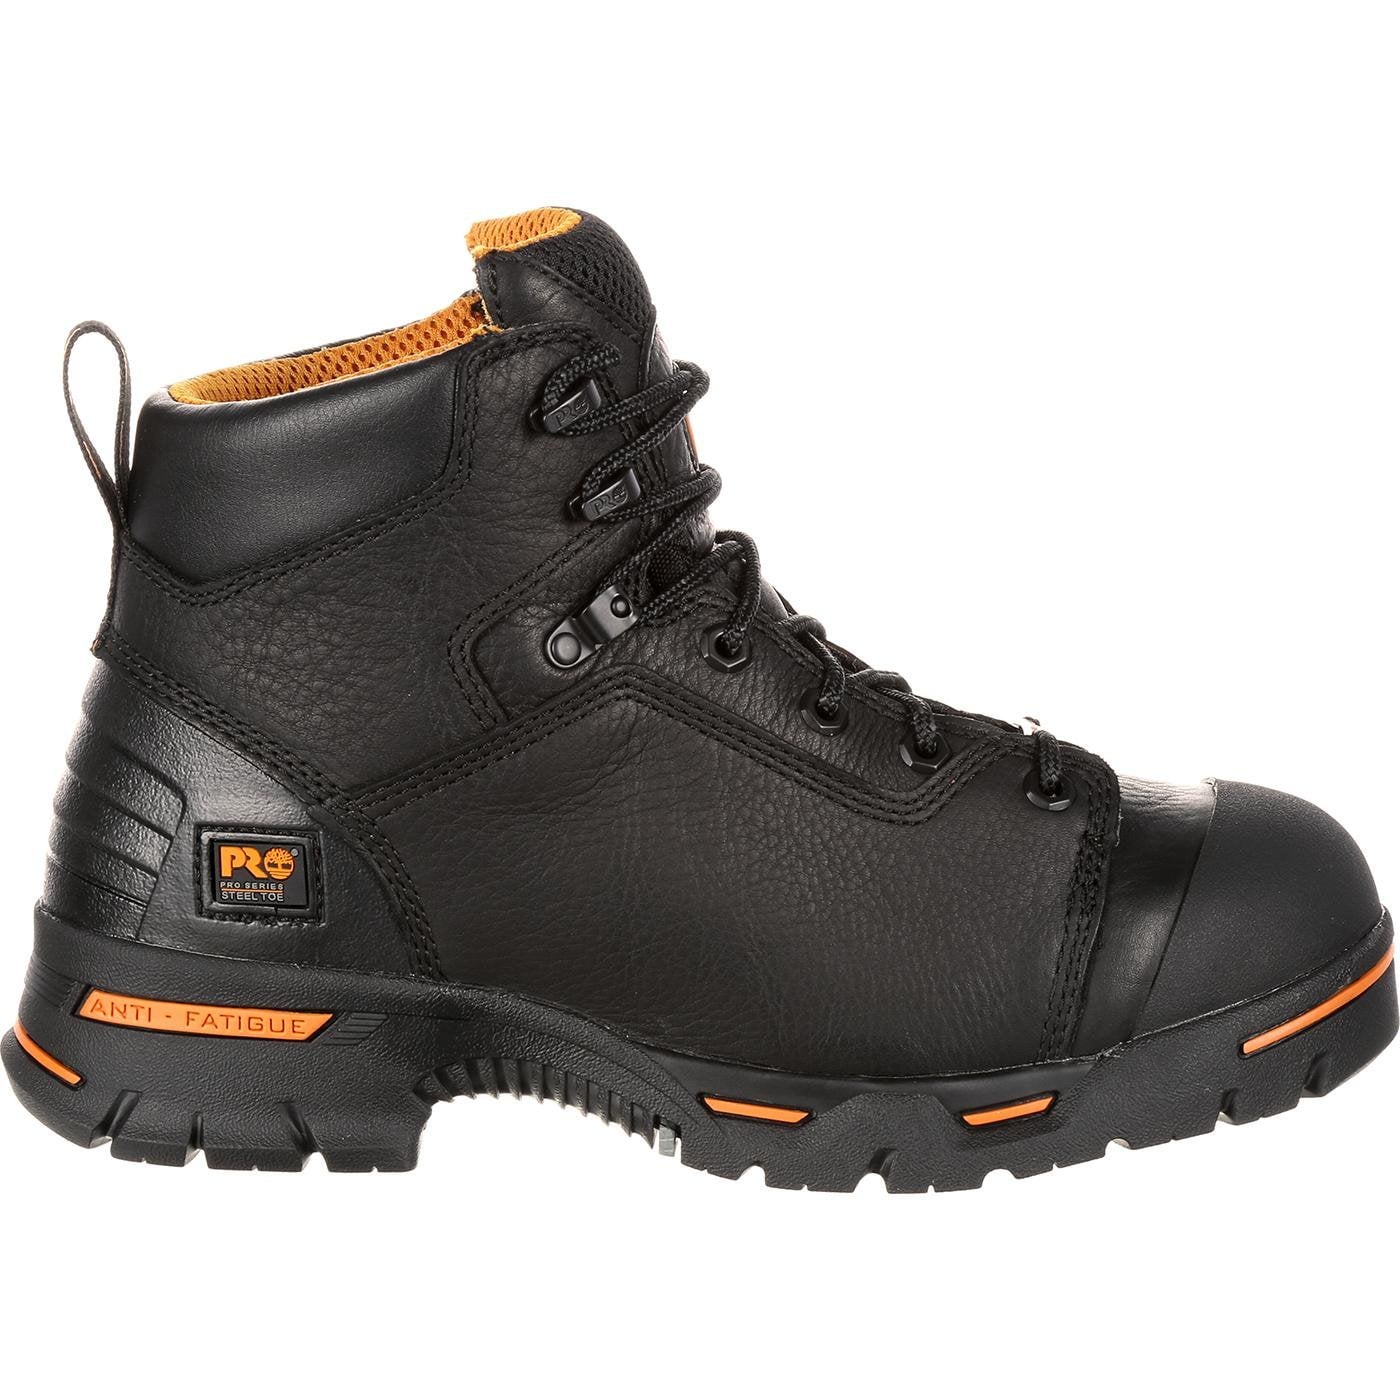 timberland puncture resistant boots